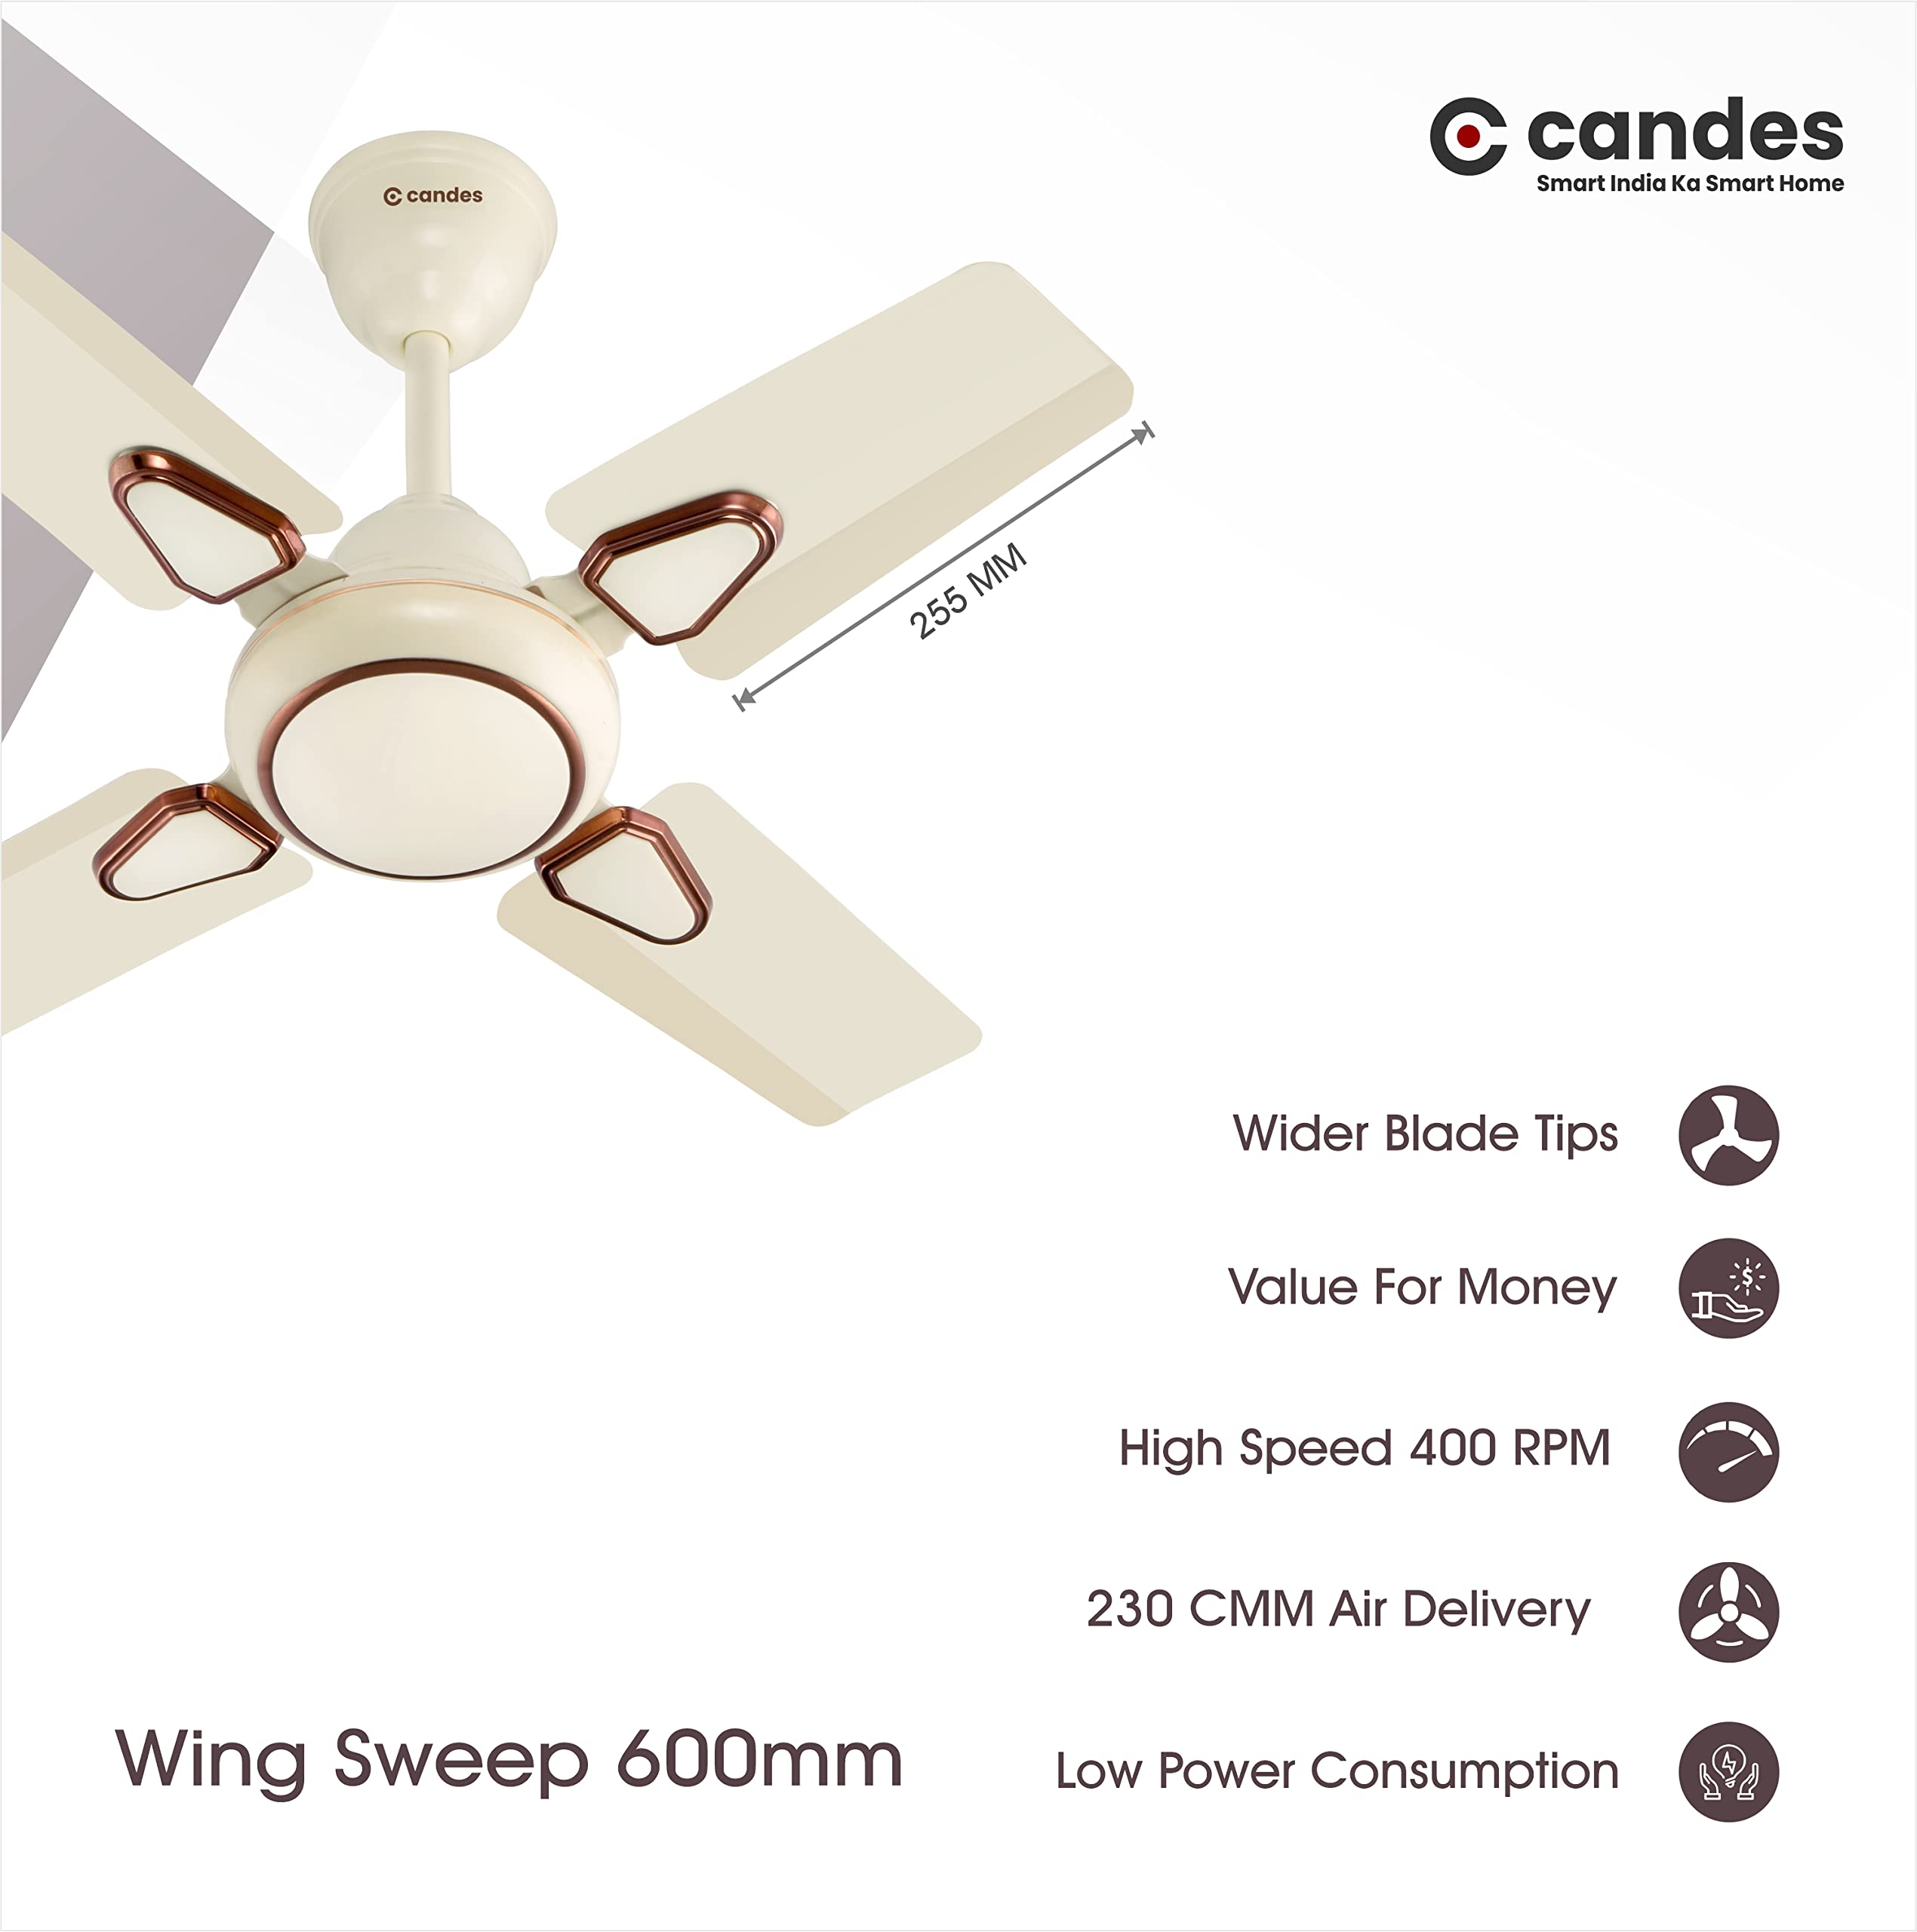 Candes Brio Turbo 600 mm / 24 Inch High Speed 4 Blade Anti-Dust Ceiling Fan Suitable for Kitchen/Veranda/Balcony/Small Room (Pack of 1,Ivory)